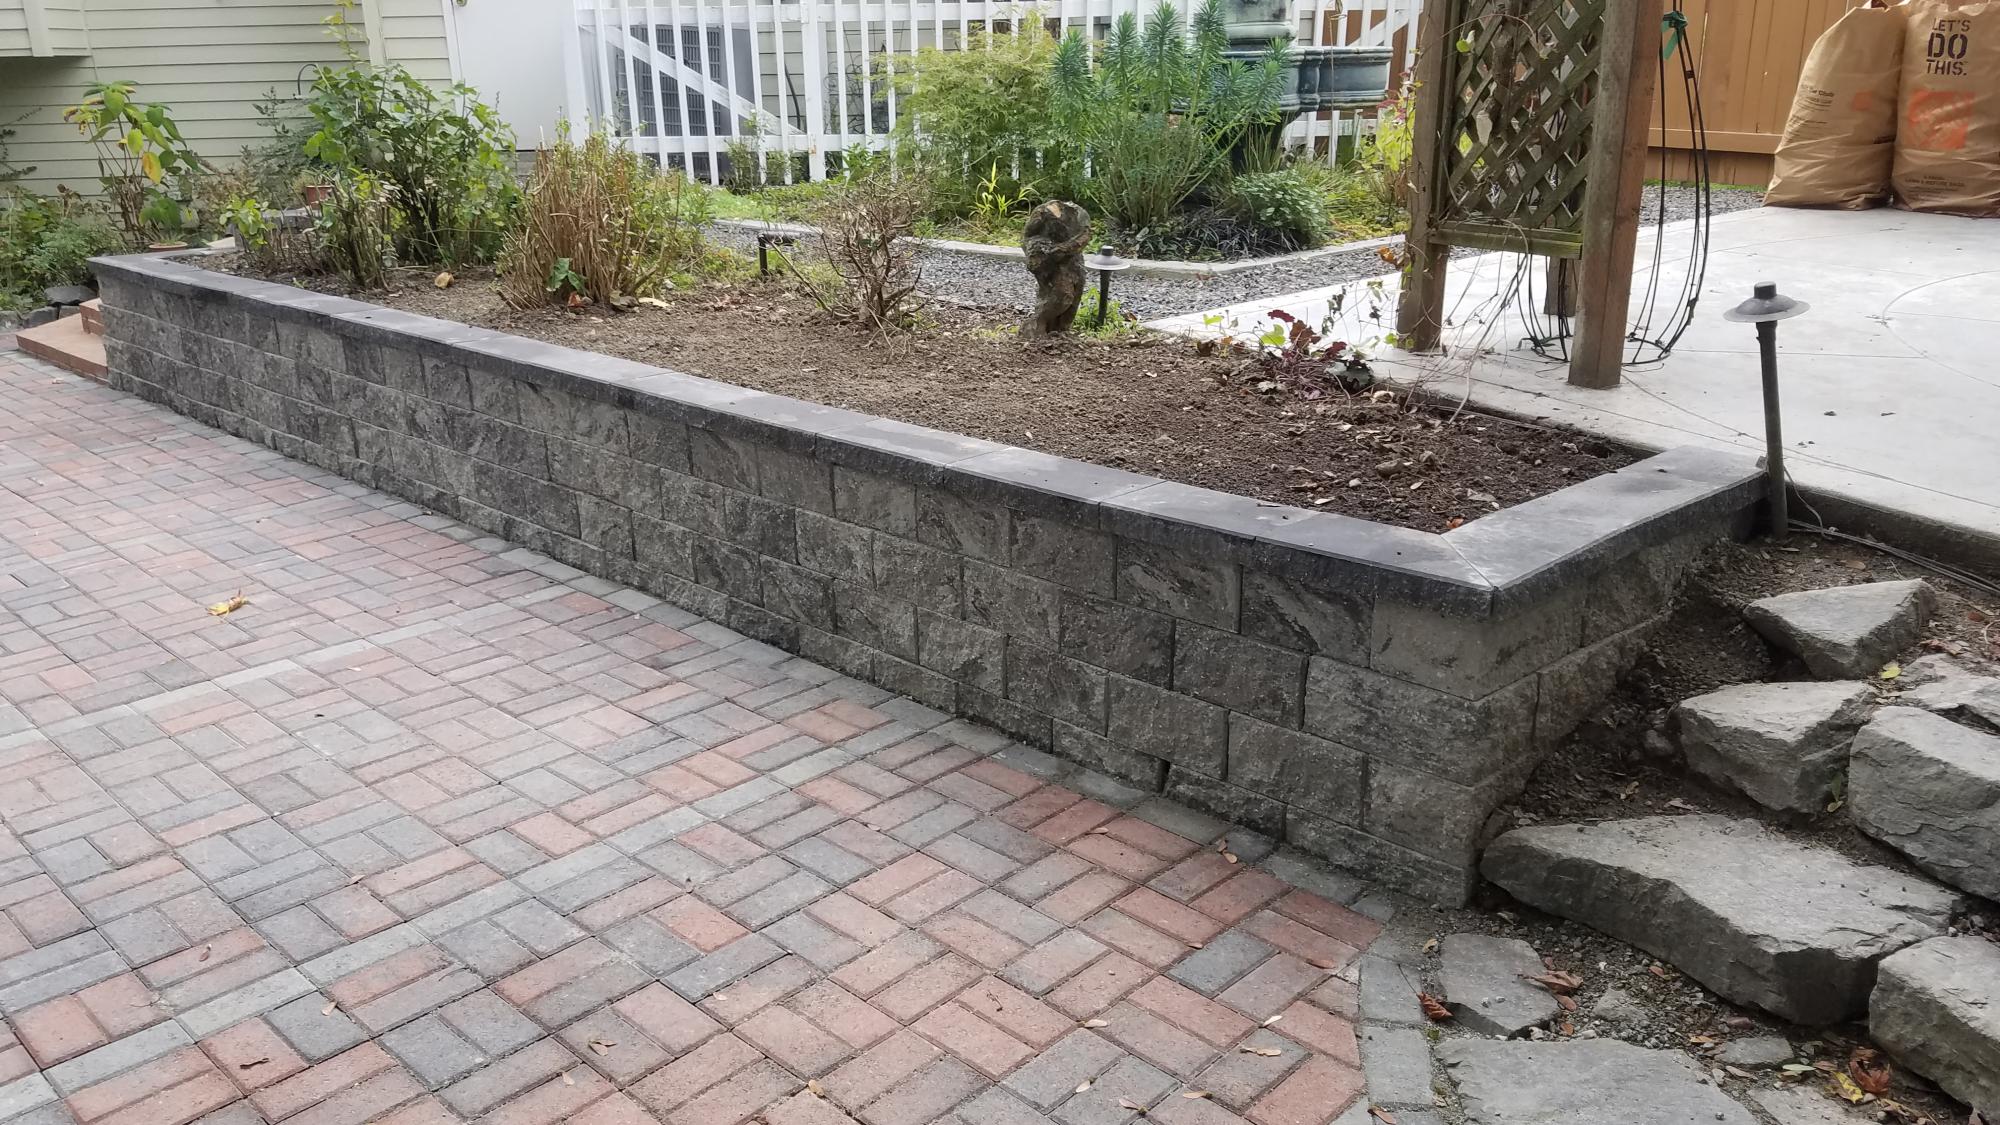 What are the pricing & rates for Rockeries & Retaining Wall services